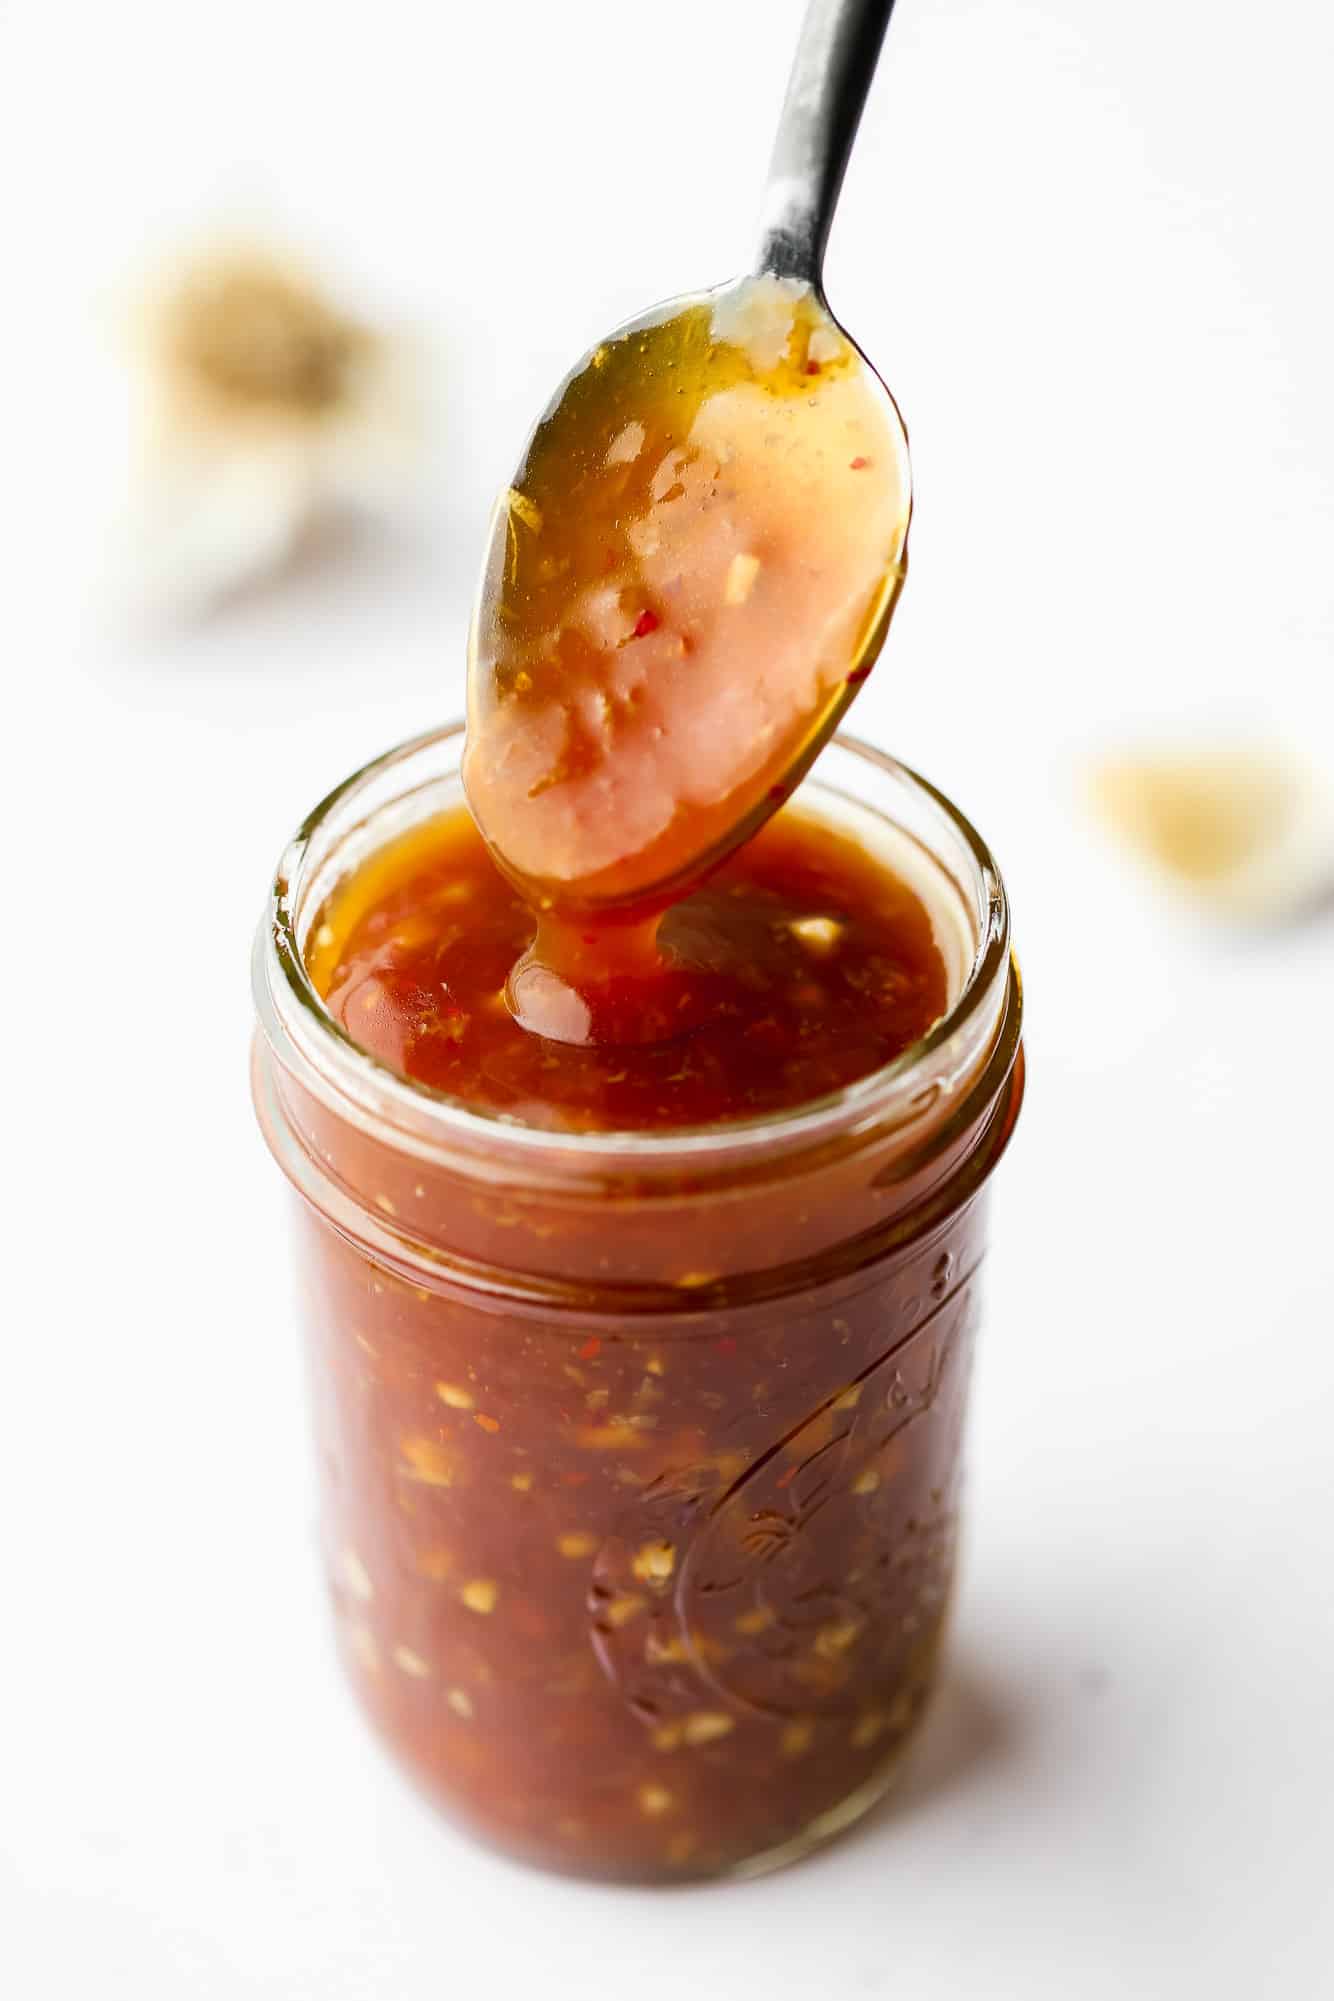 a sauce-covered spoon coming out of a jar of stir fry sauce.